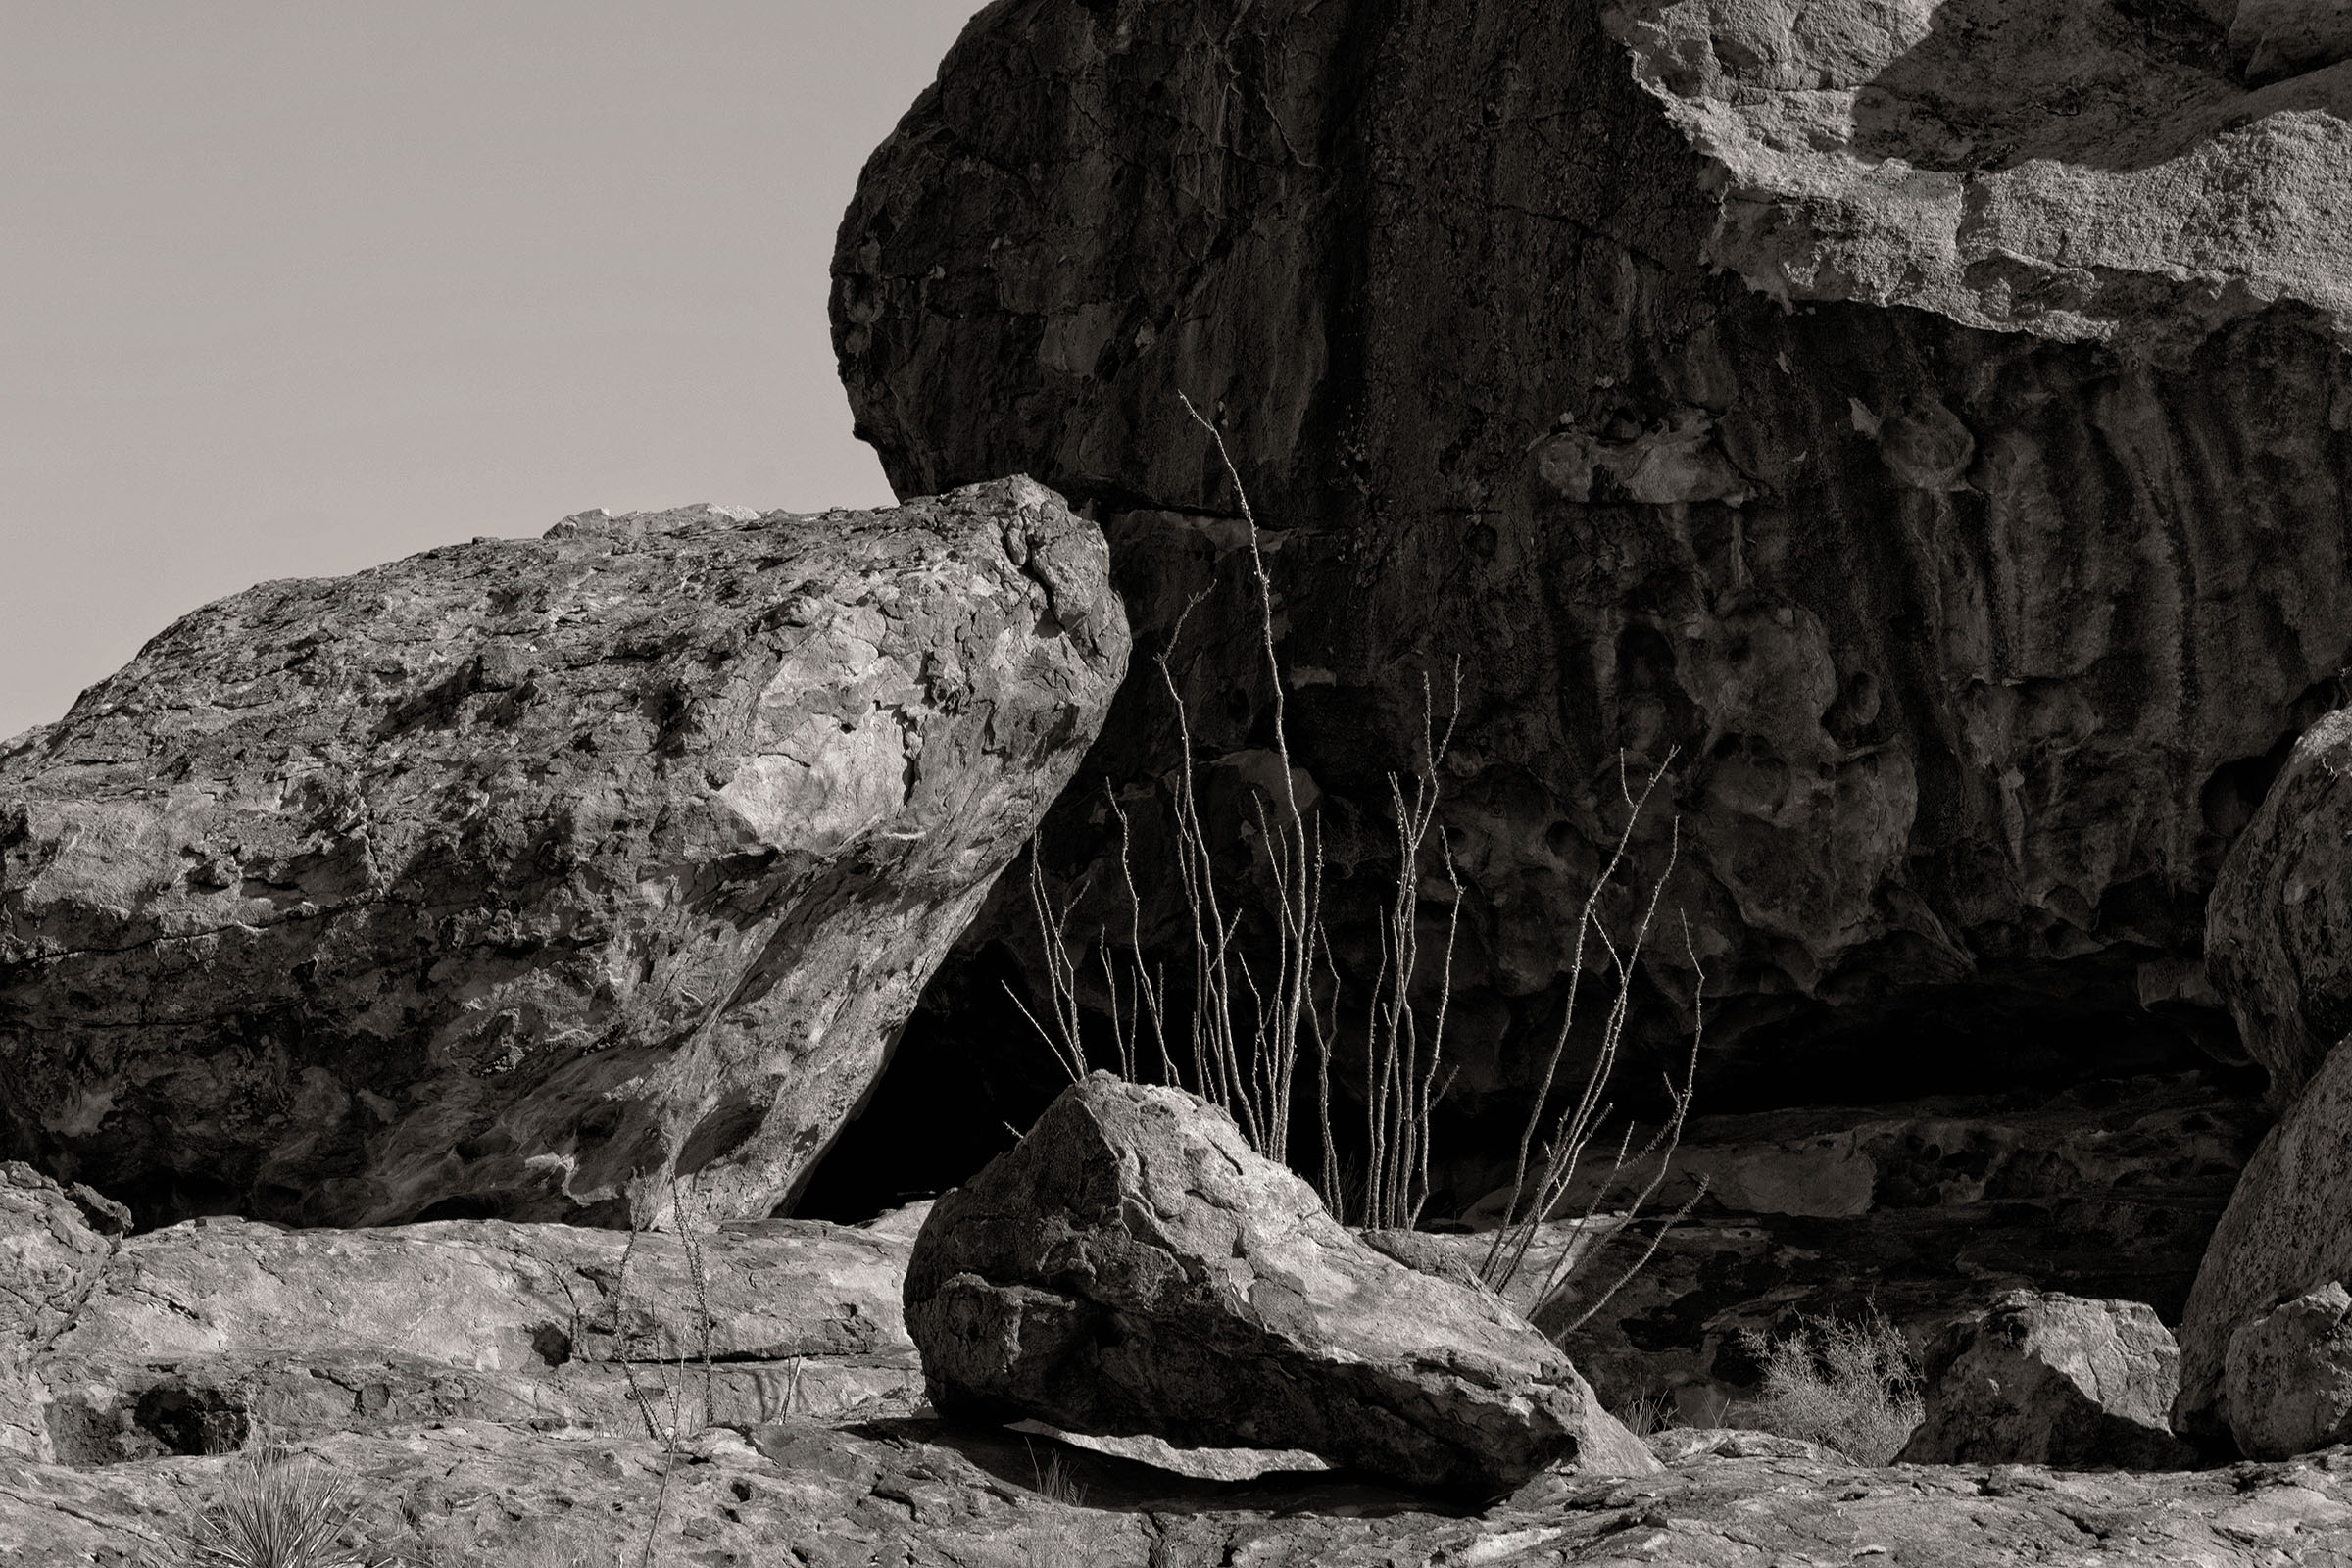 A black and white photo of boulders in a desert scene